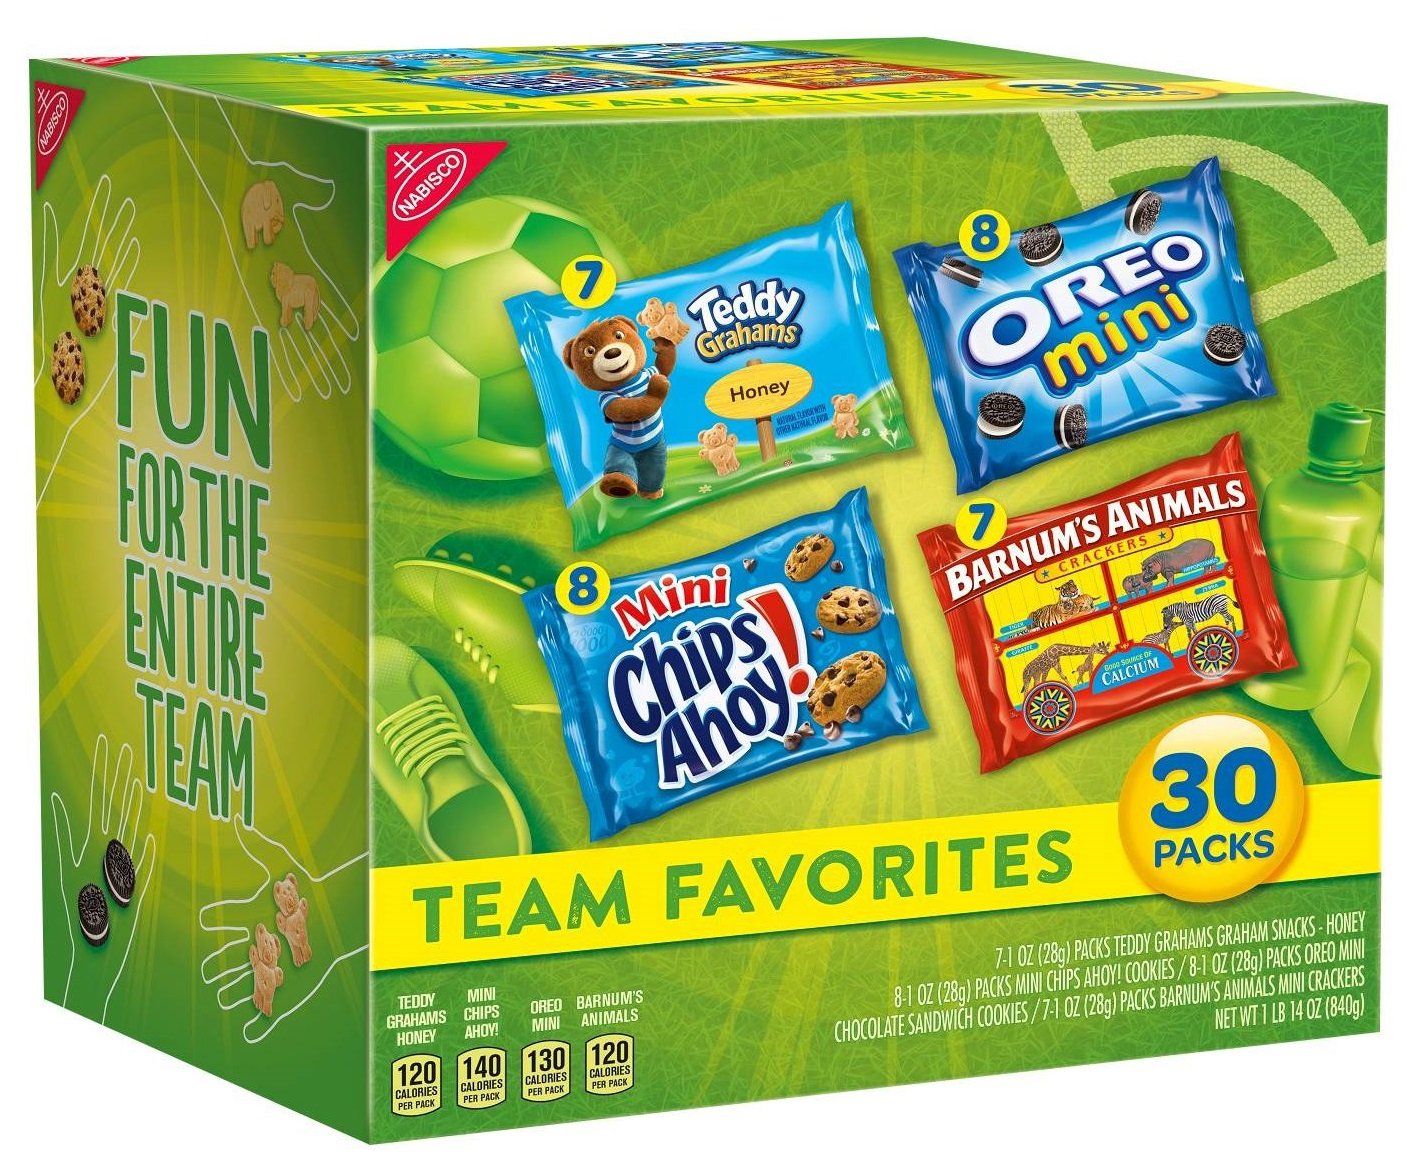 nabisco-team-favorites-mix-cookies-crackers-30-count-box-only-6